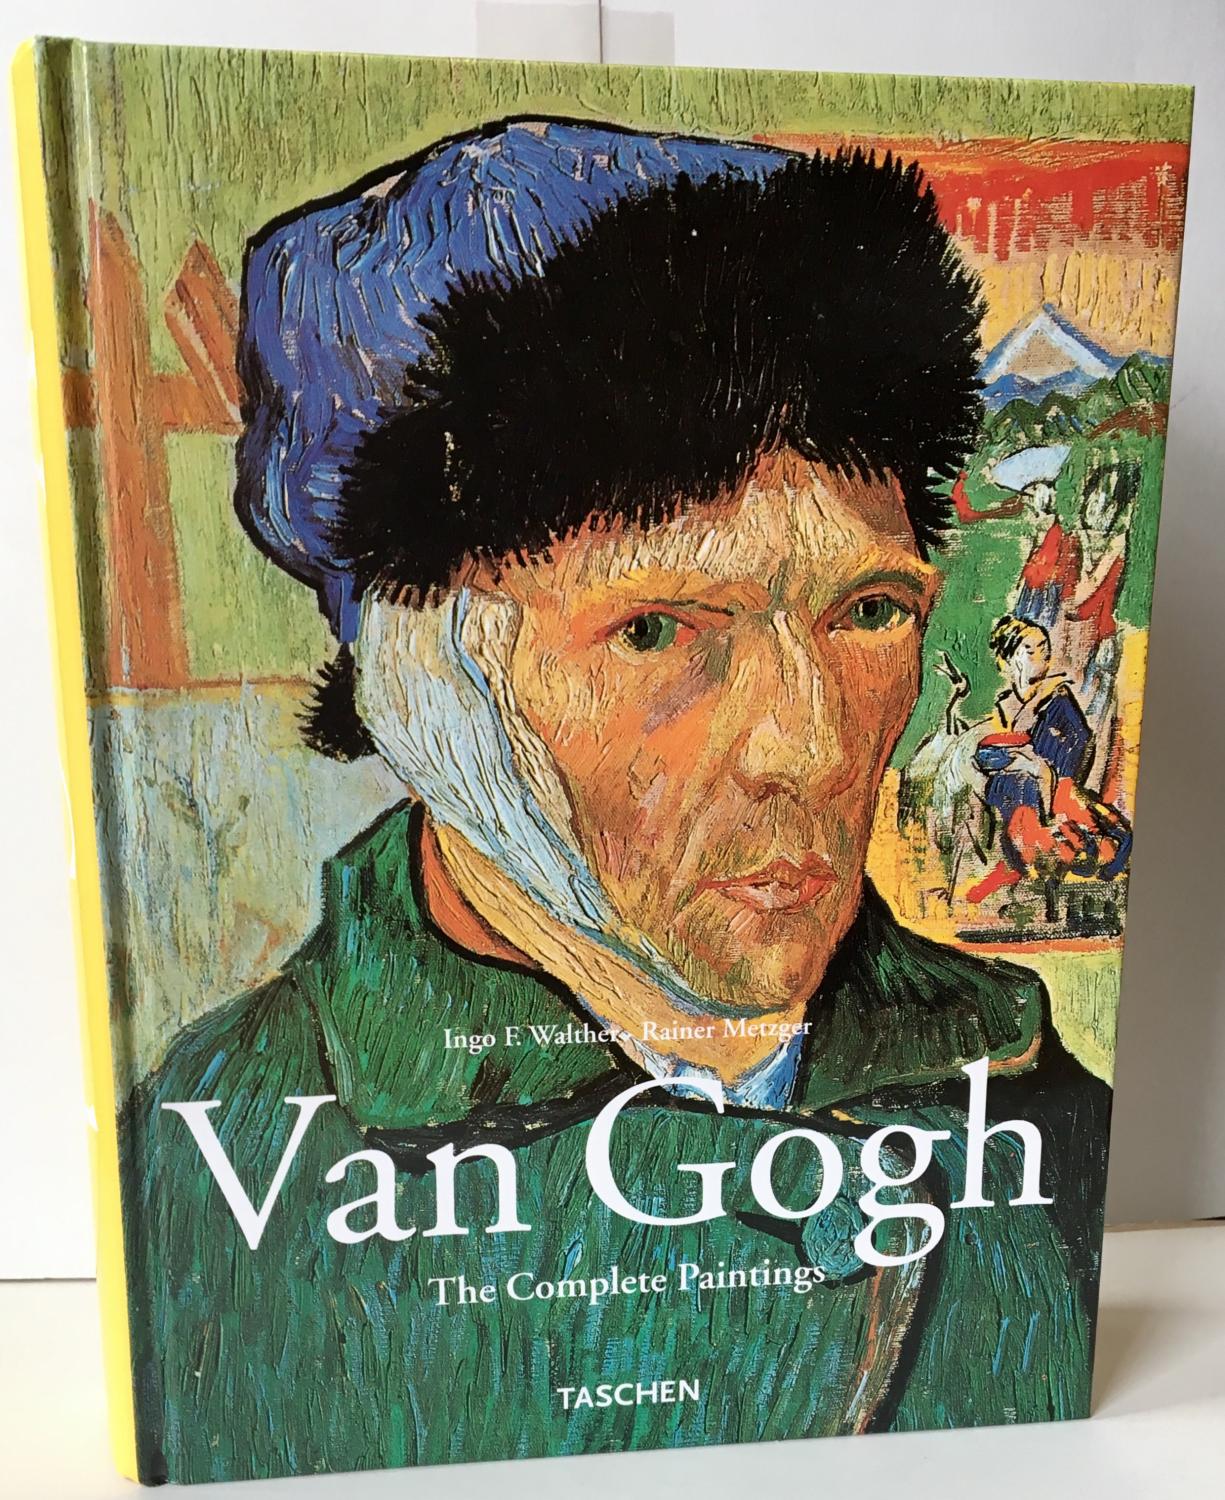 Vincent van Gogh - The Complete Paintings.